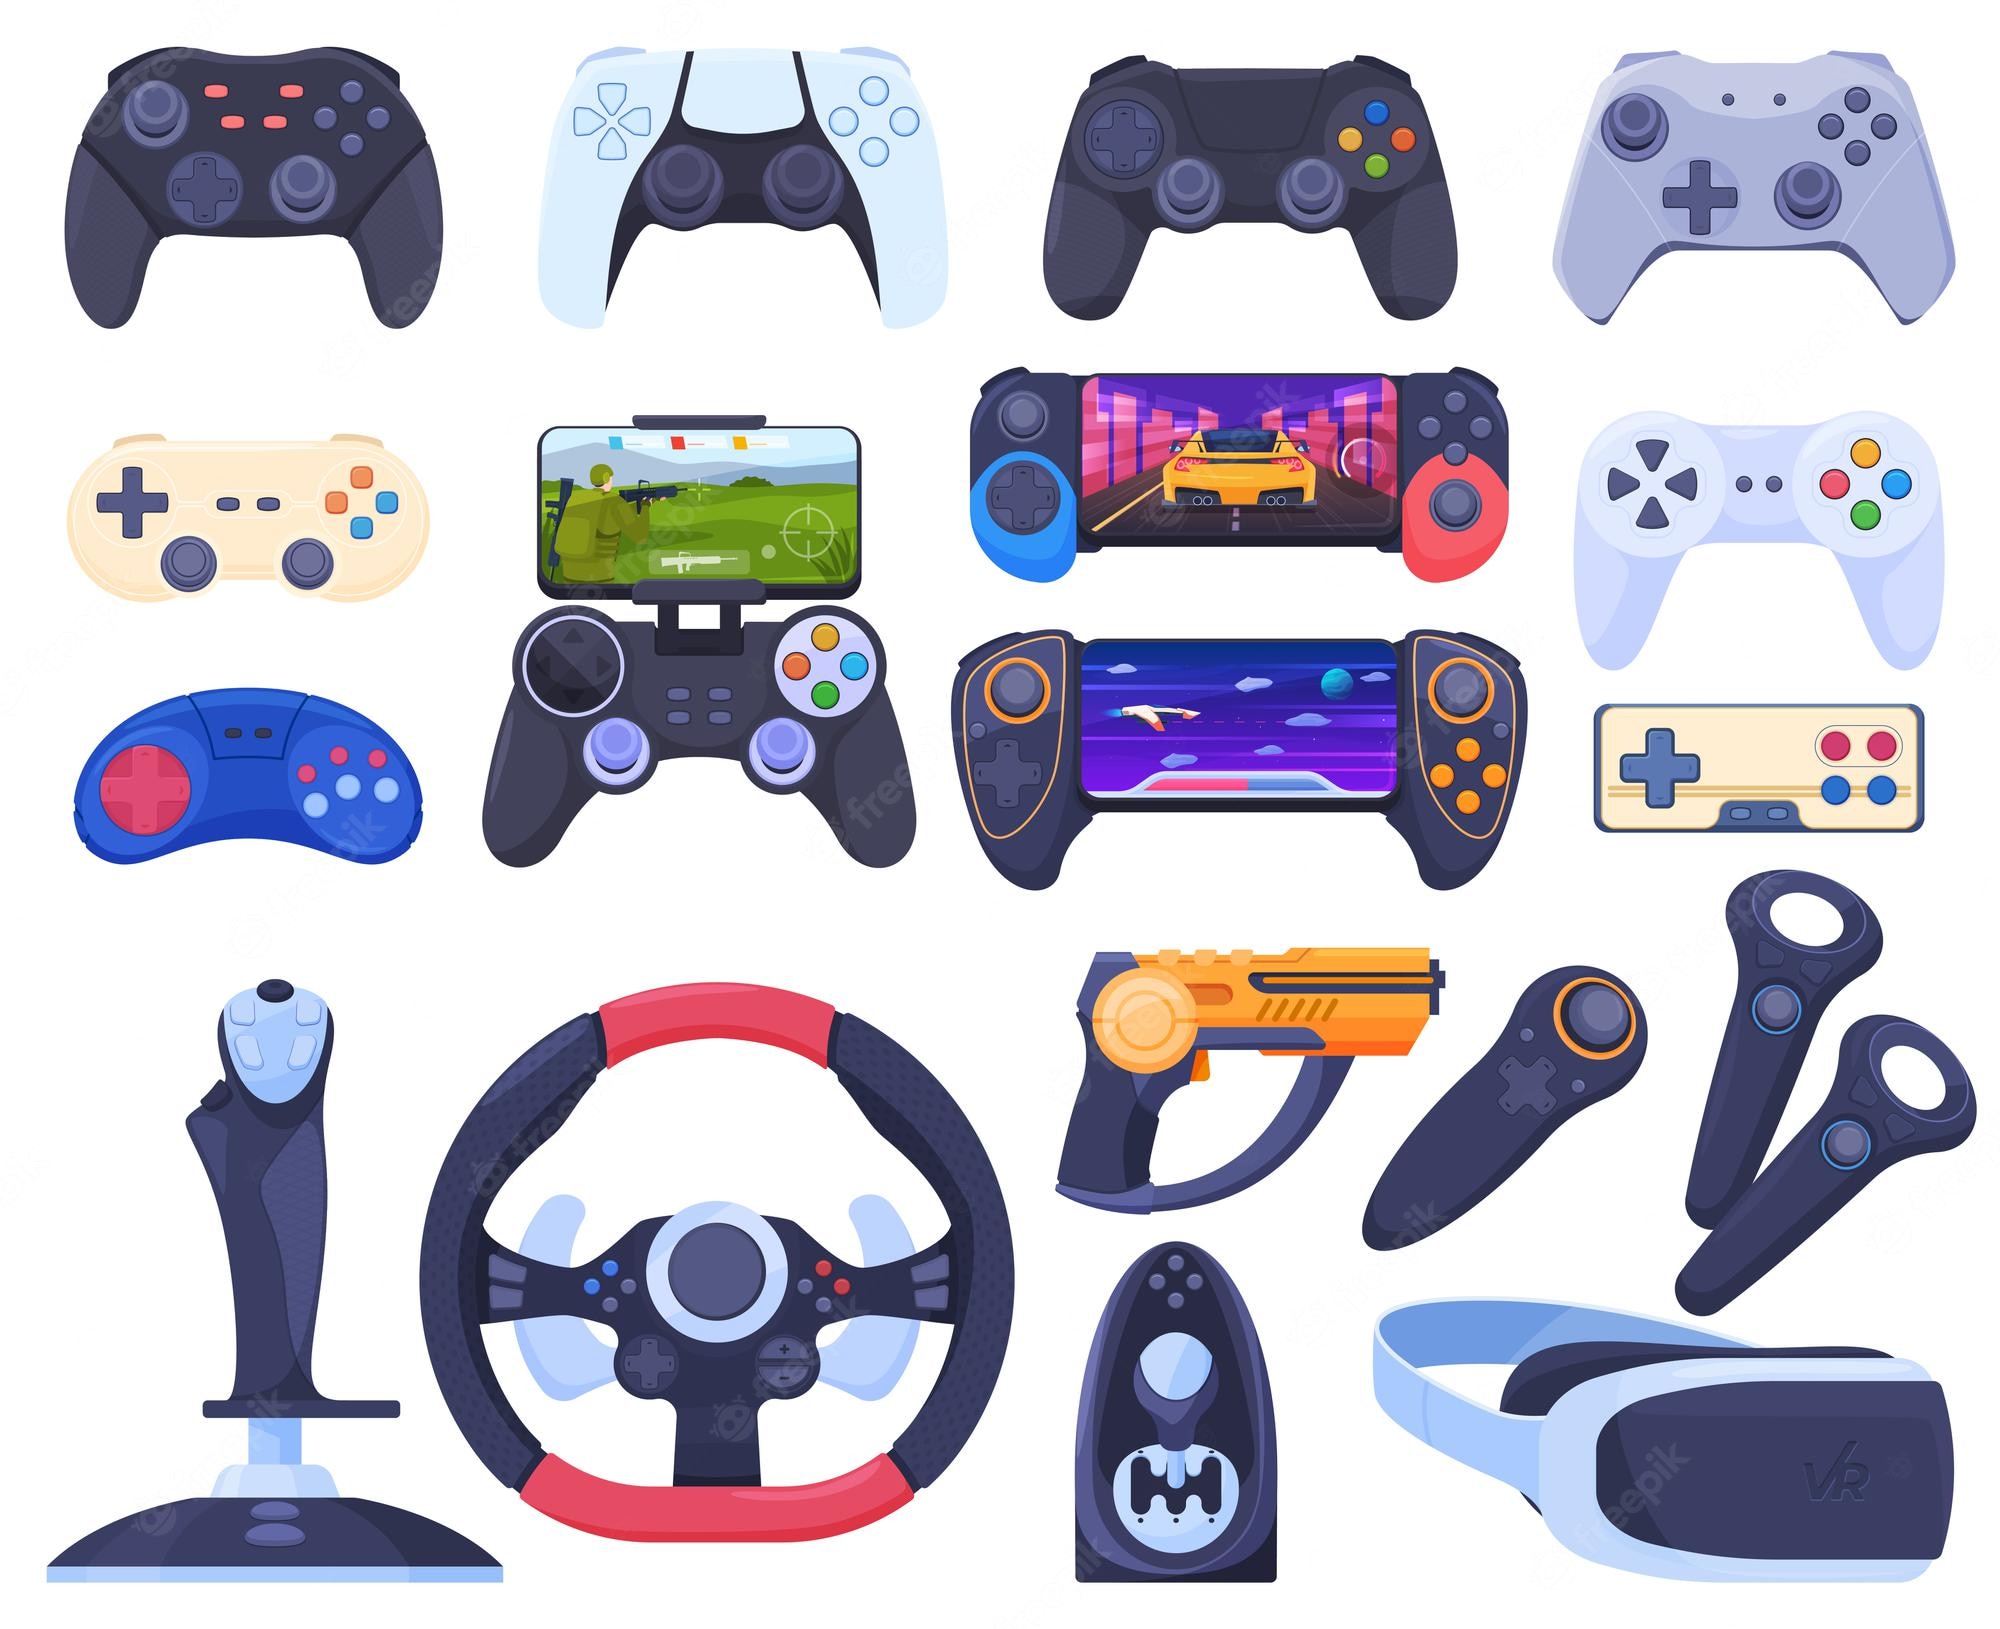 Game controller Image. Free Vectors, & PSD